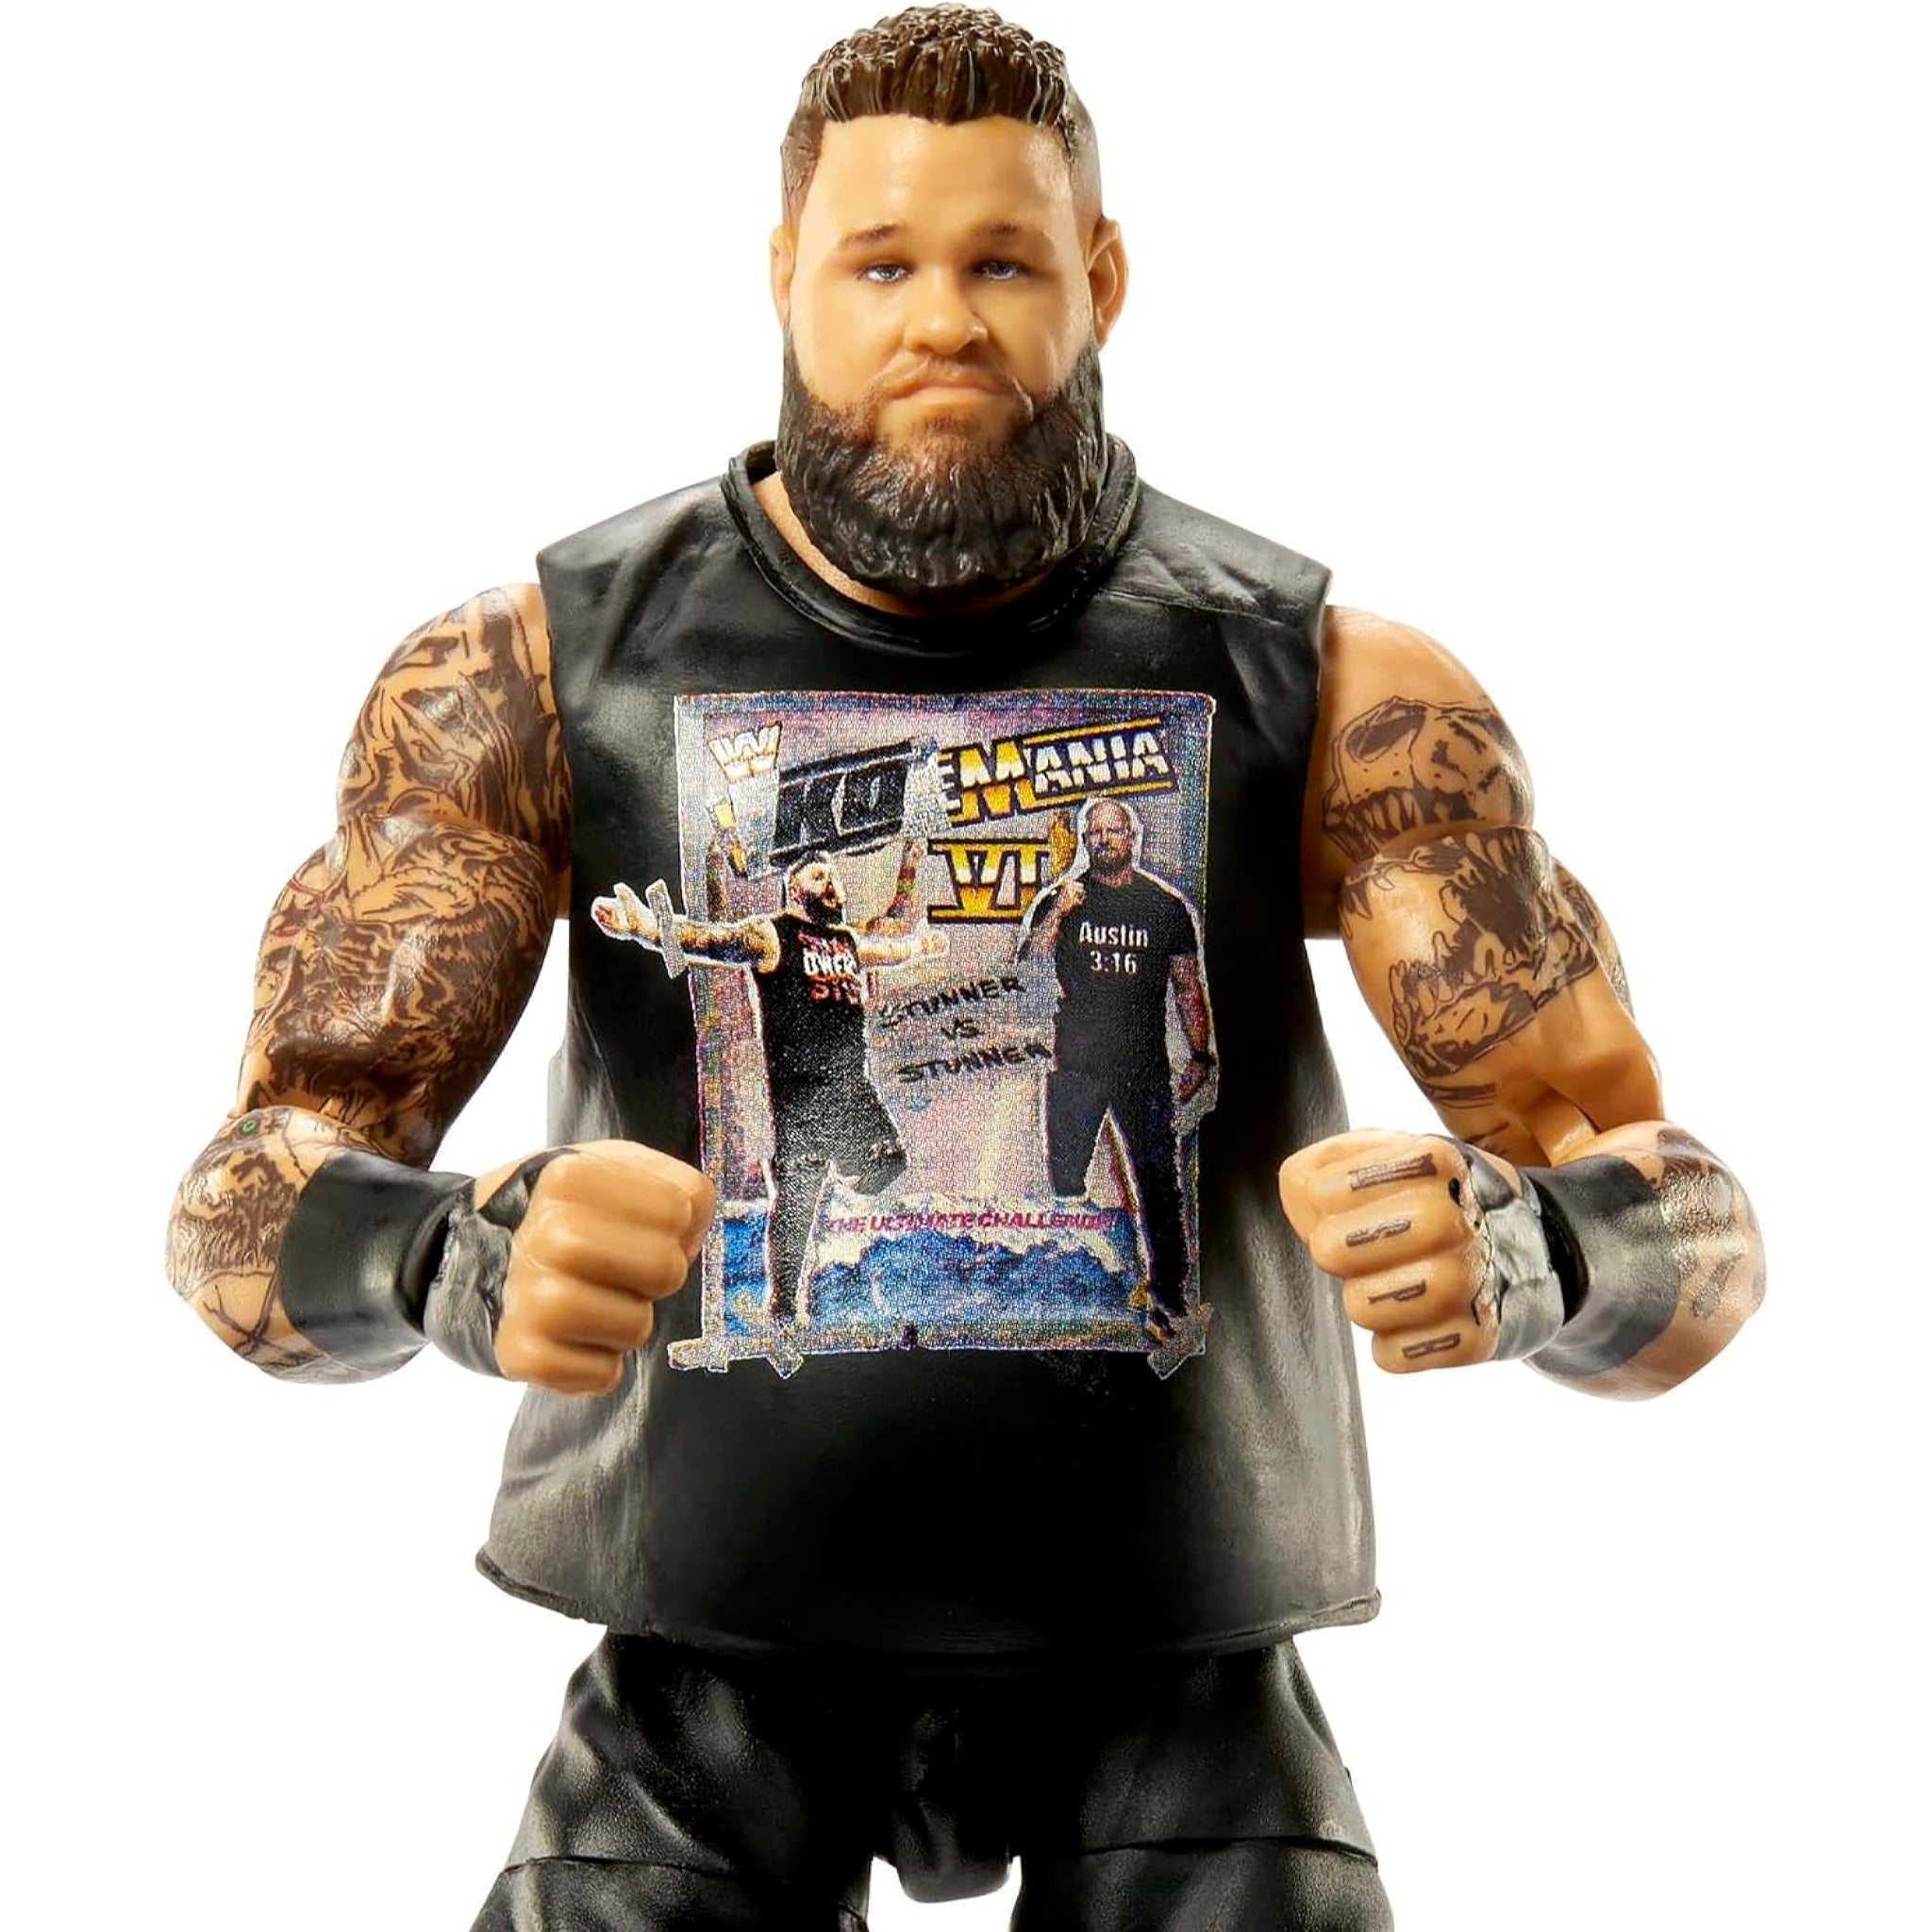 WWE Elite Kevin Owens Collectible Action Figure